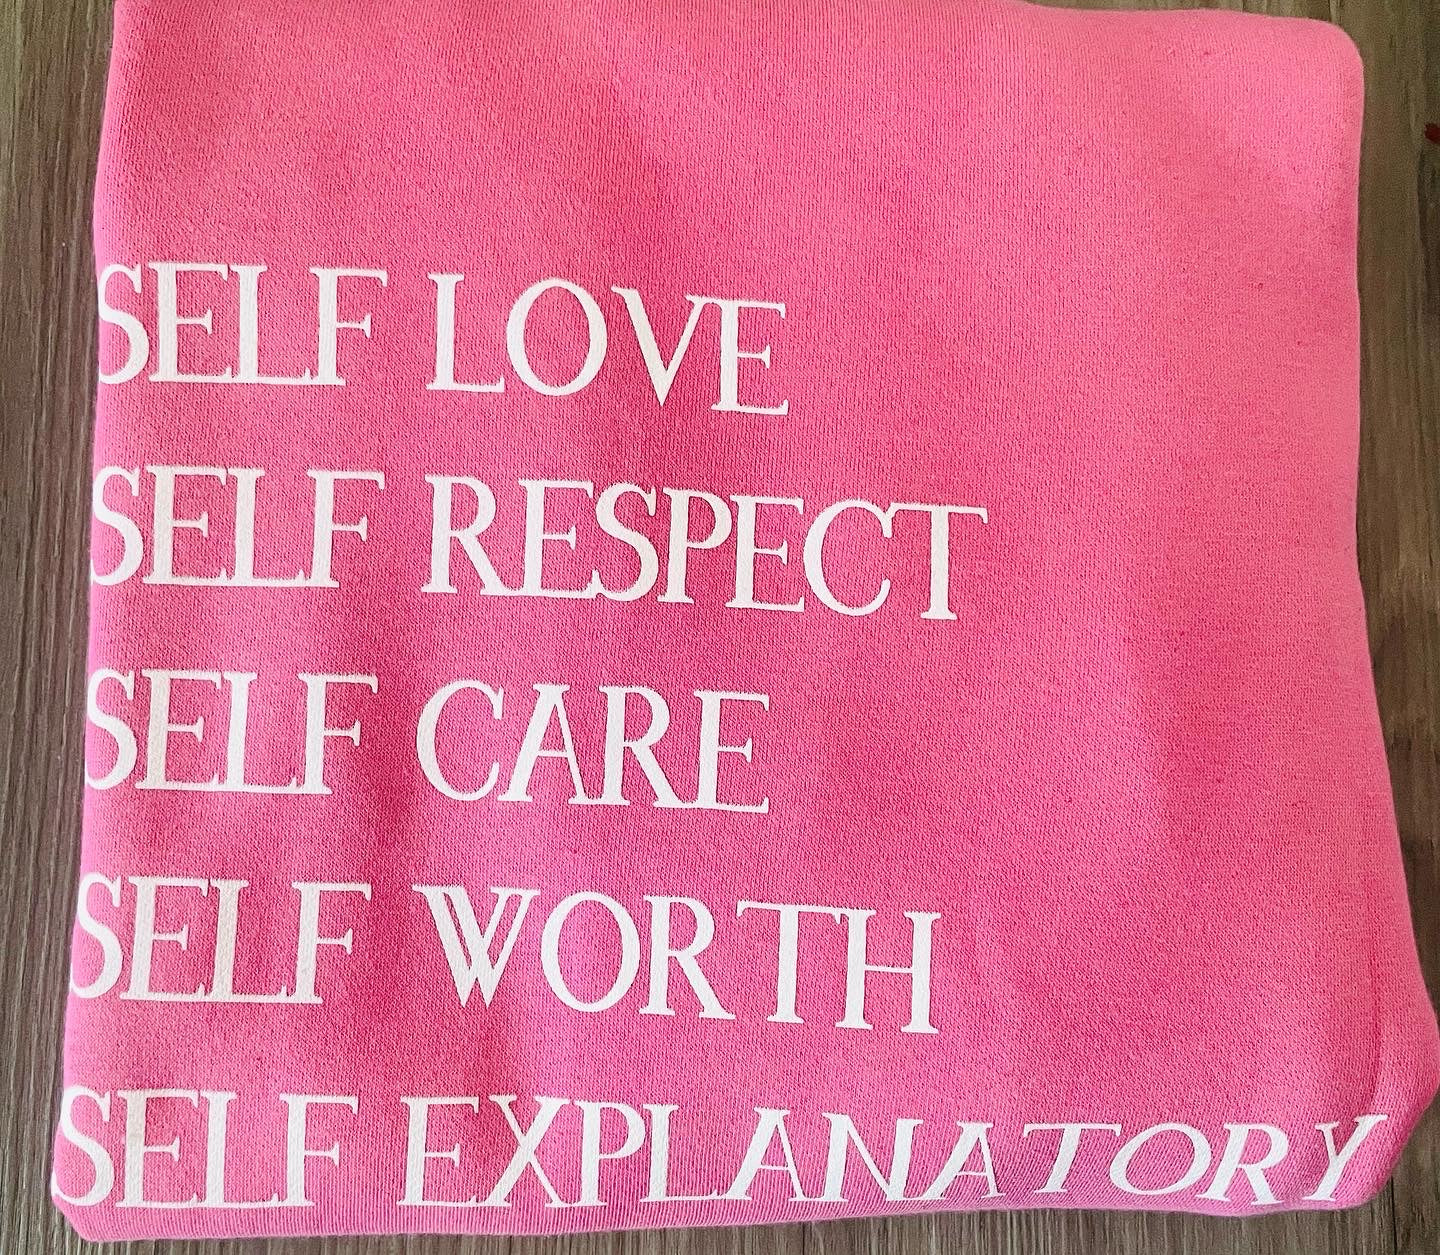 SELF•CARE CHENILLE HOODY/CREWNECK COLLECTION